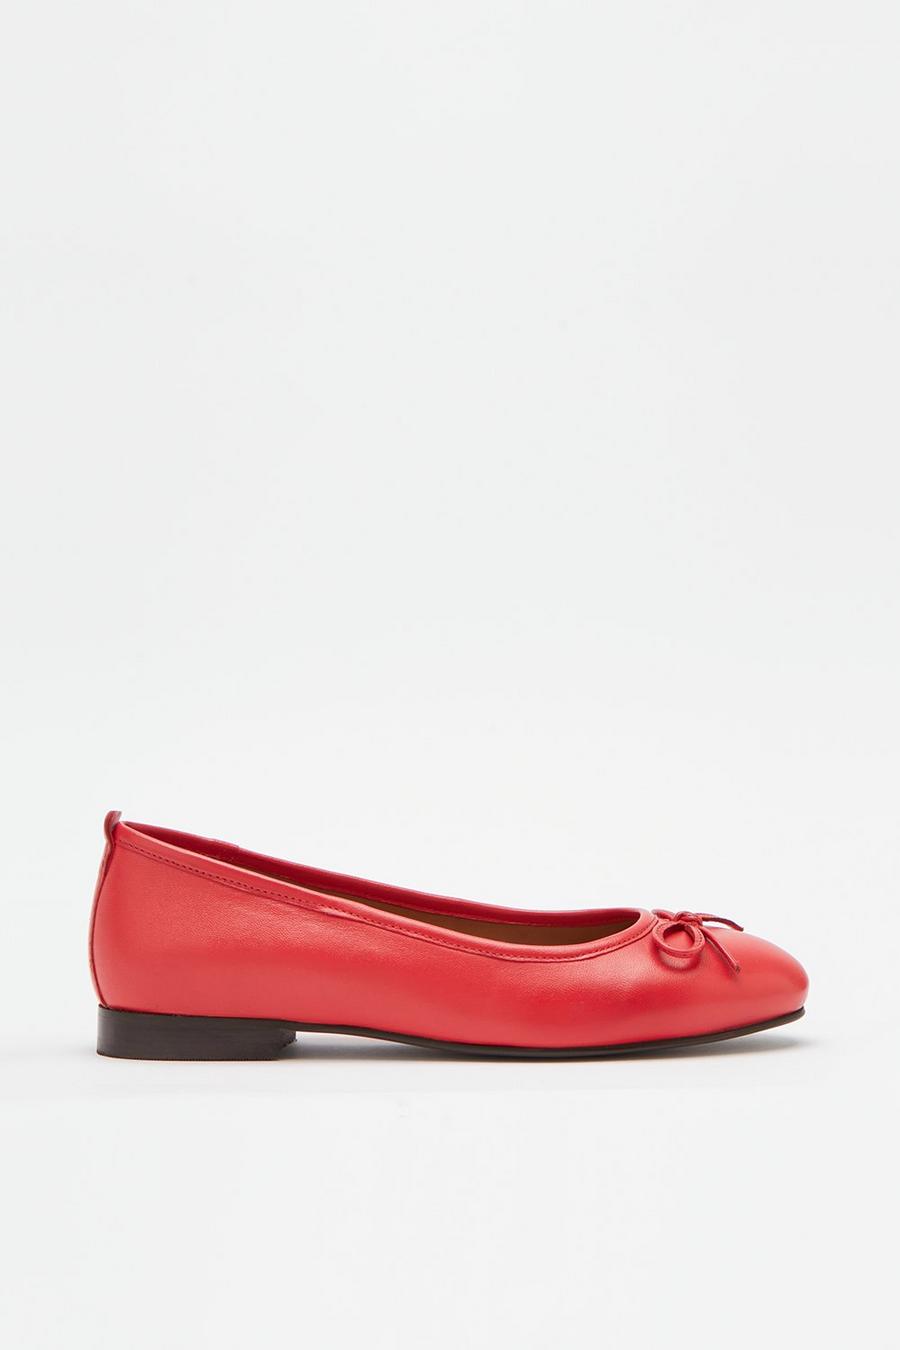 Good For The Sole: Trixie Leather Ballerina